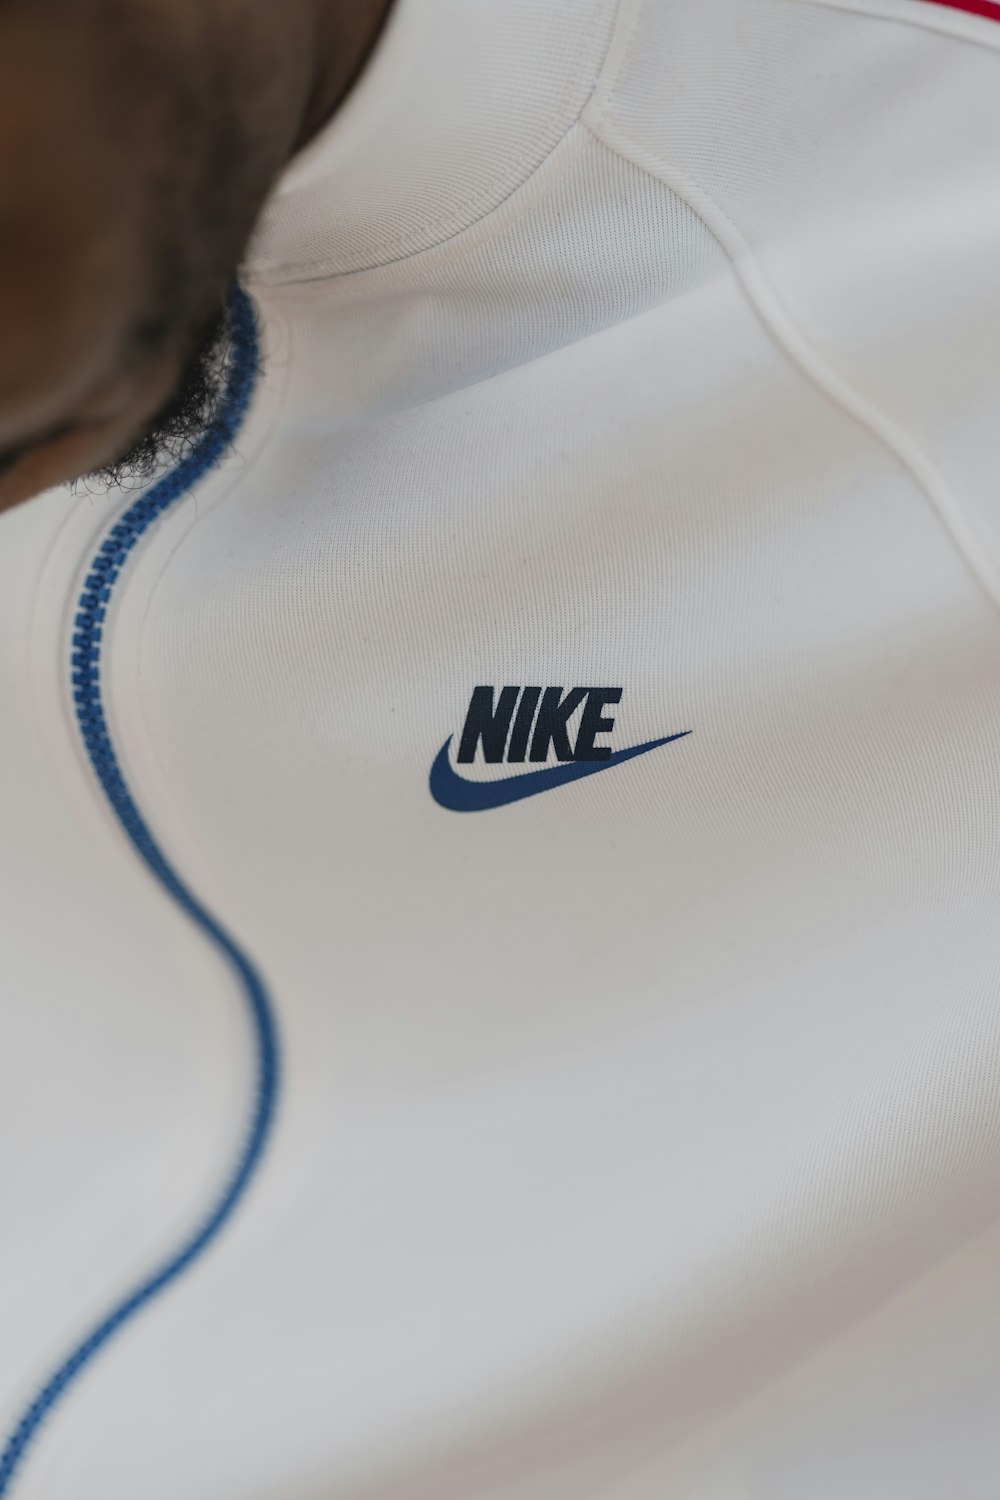 person in white nike crew neck shirt